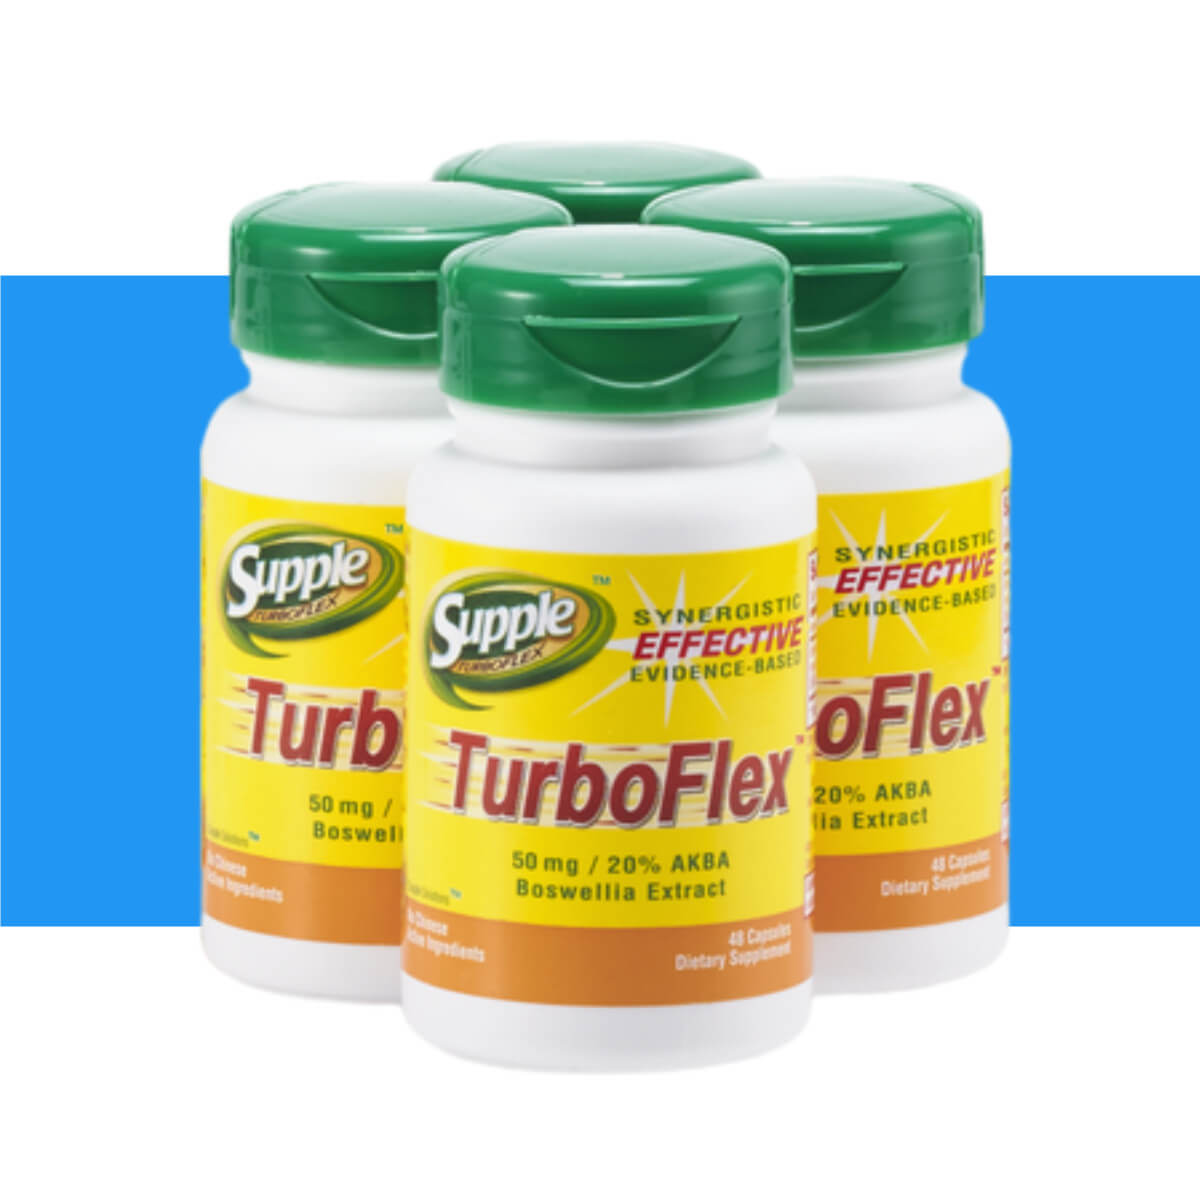 Supple TurboFlex with boswellia serrata 4 bottles, 192 capsules, with blue stripe. Tip: Strong muscles help knee pain relief.